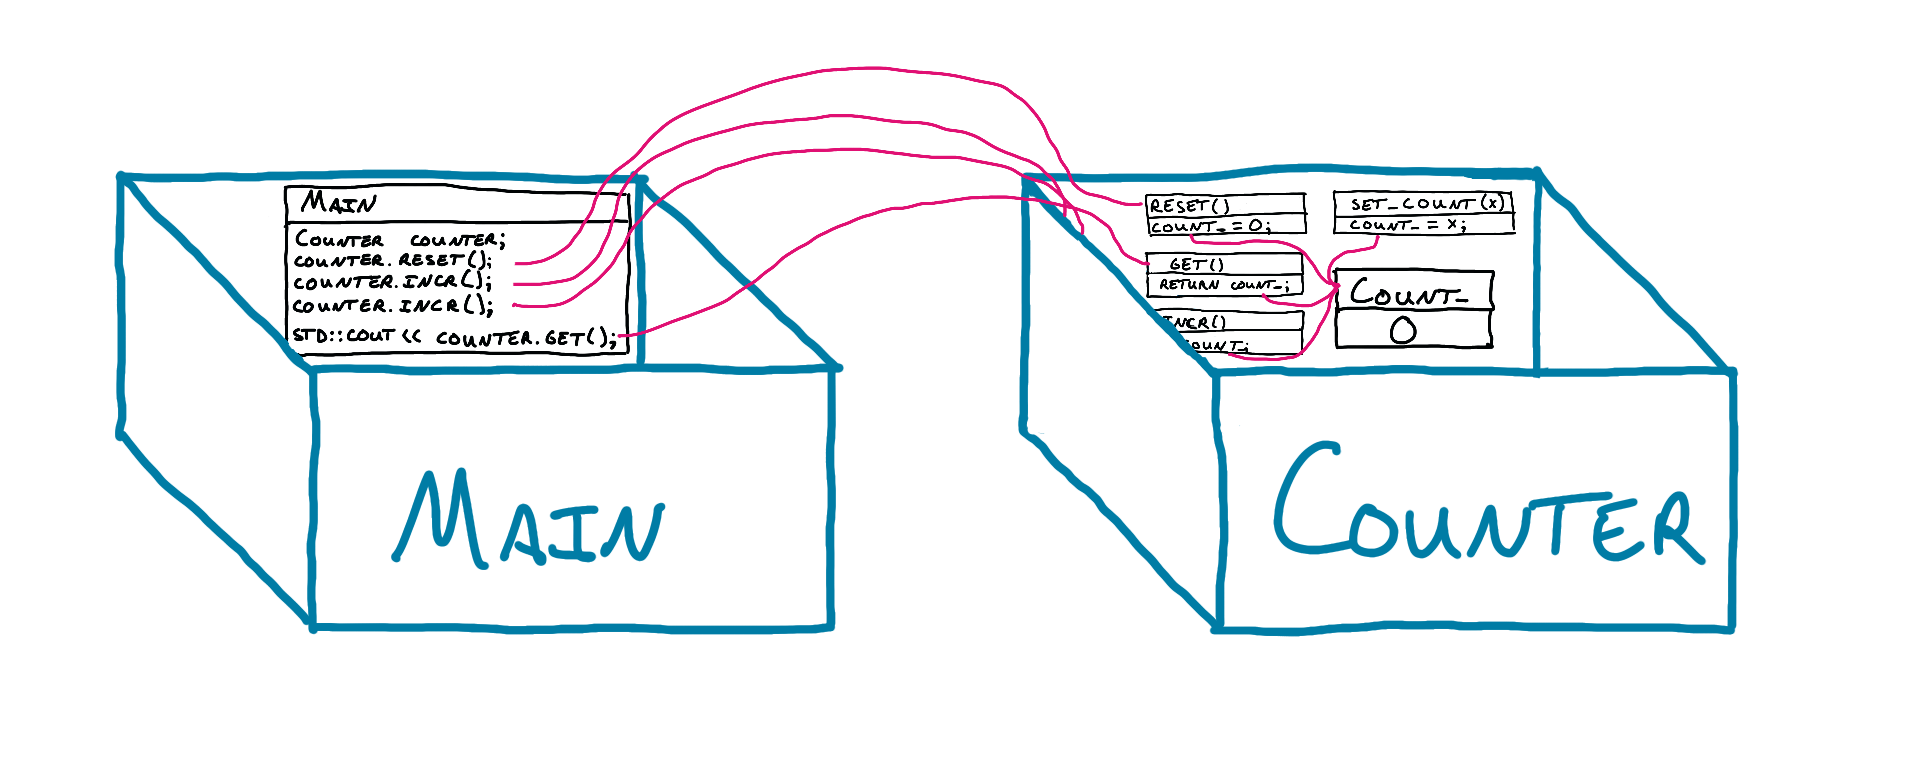 Two separate rooms, Main and Counter, with the code in the main function in the left room connected to the corresponding call in the Counter room via pink strings